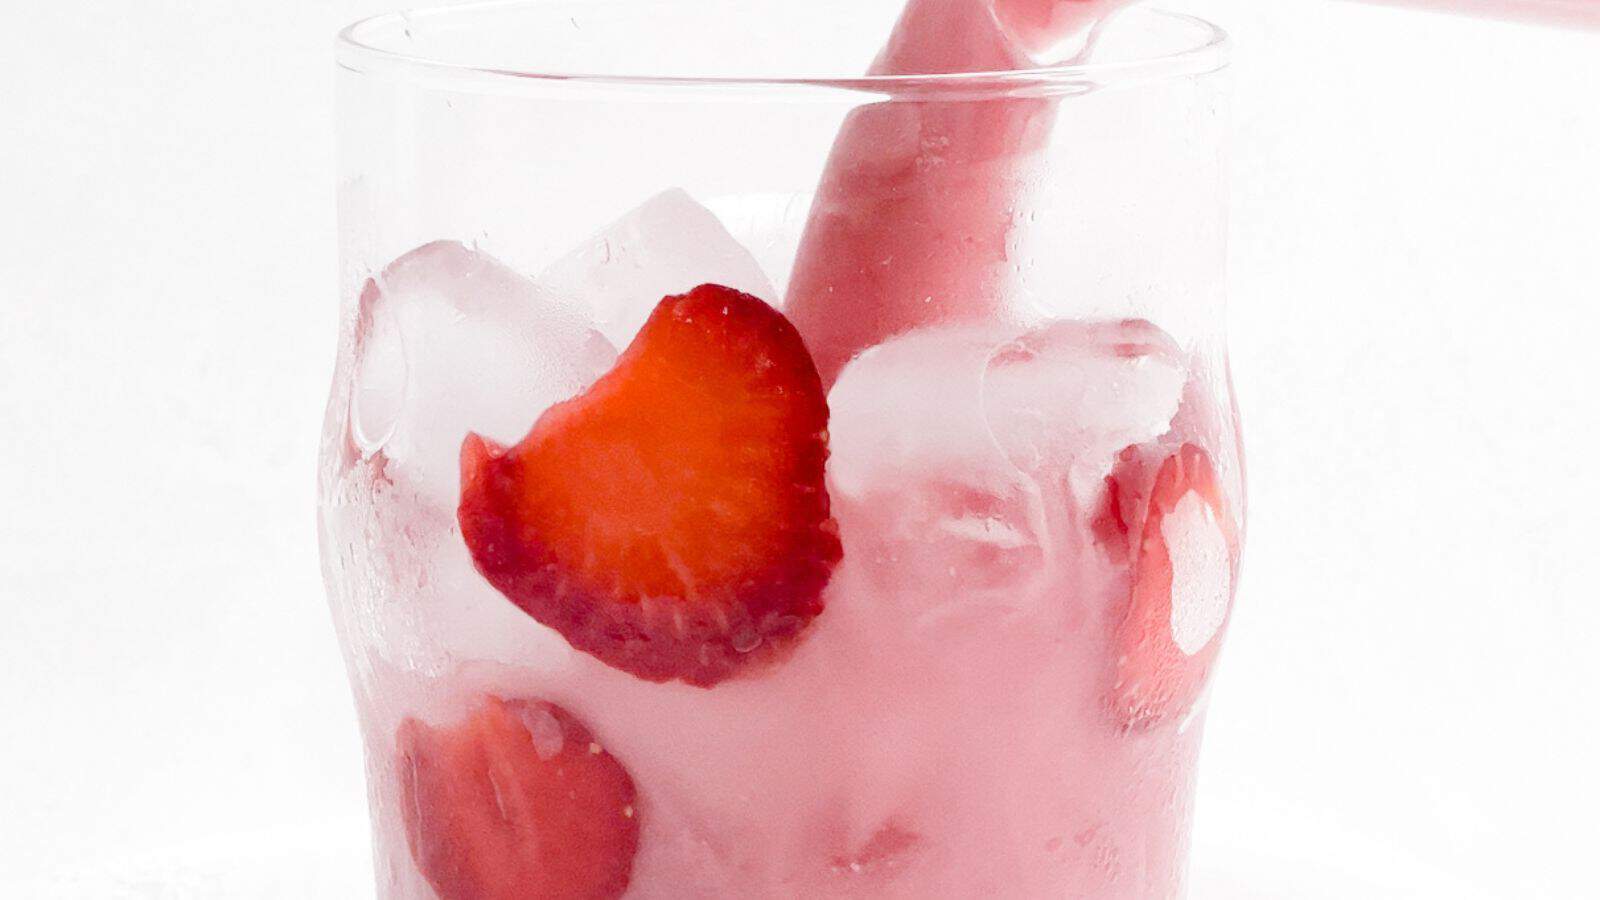 A close-up view of a glass filled with ice and sliced strawberries, with a pink tinted liquid visible.